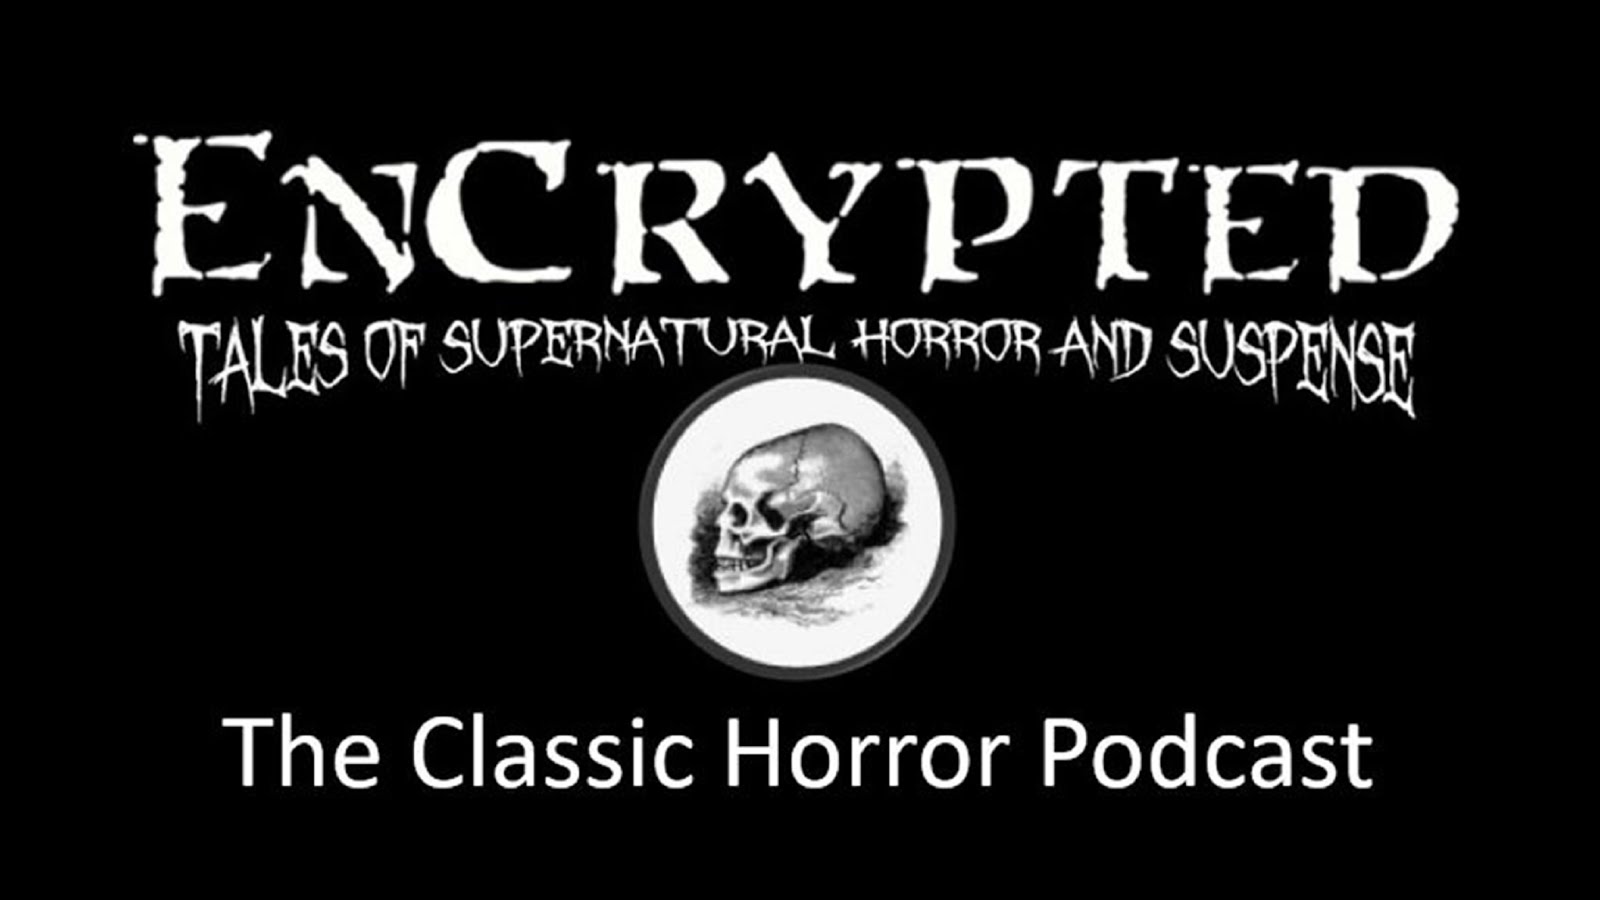 EnCrypted: The Classic Horror Podcast